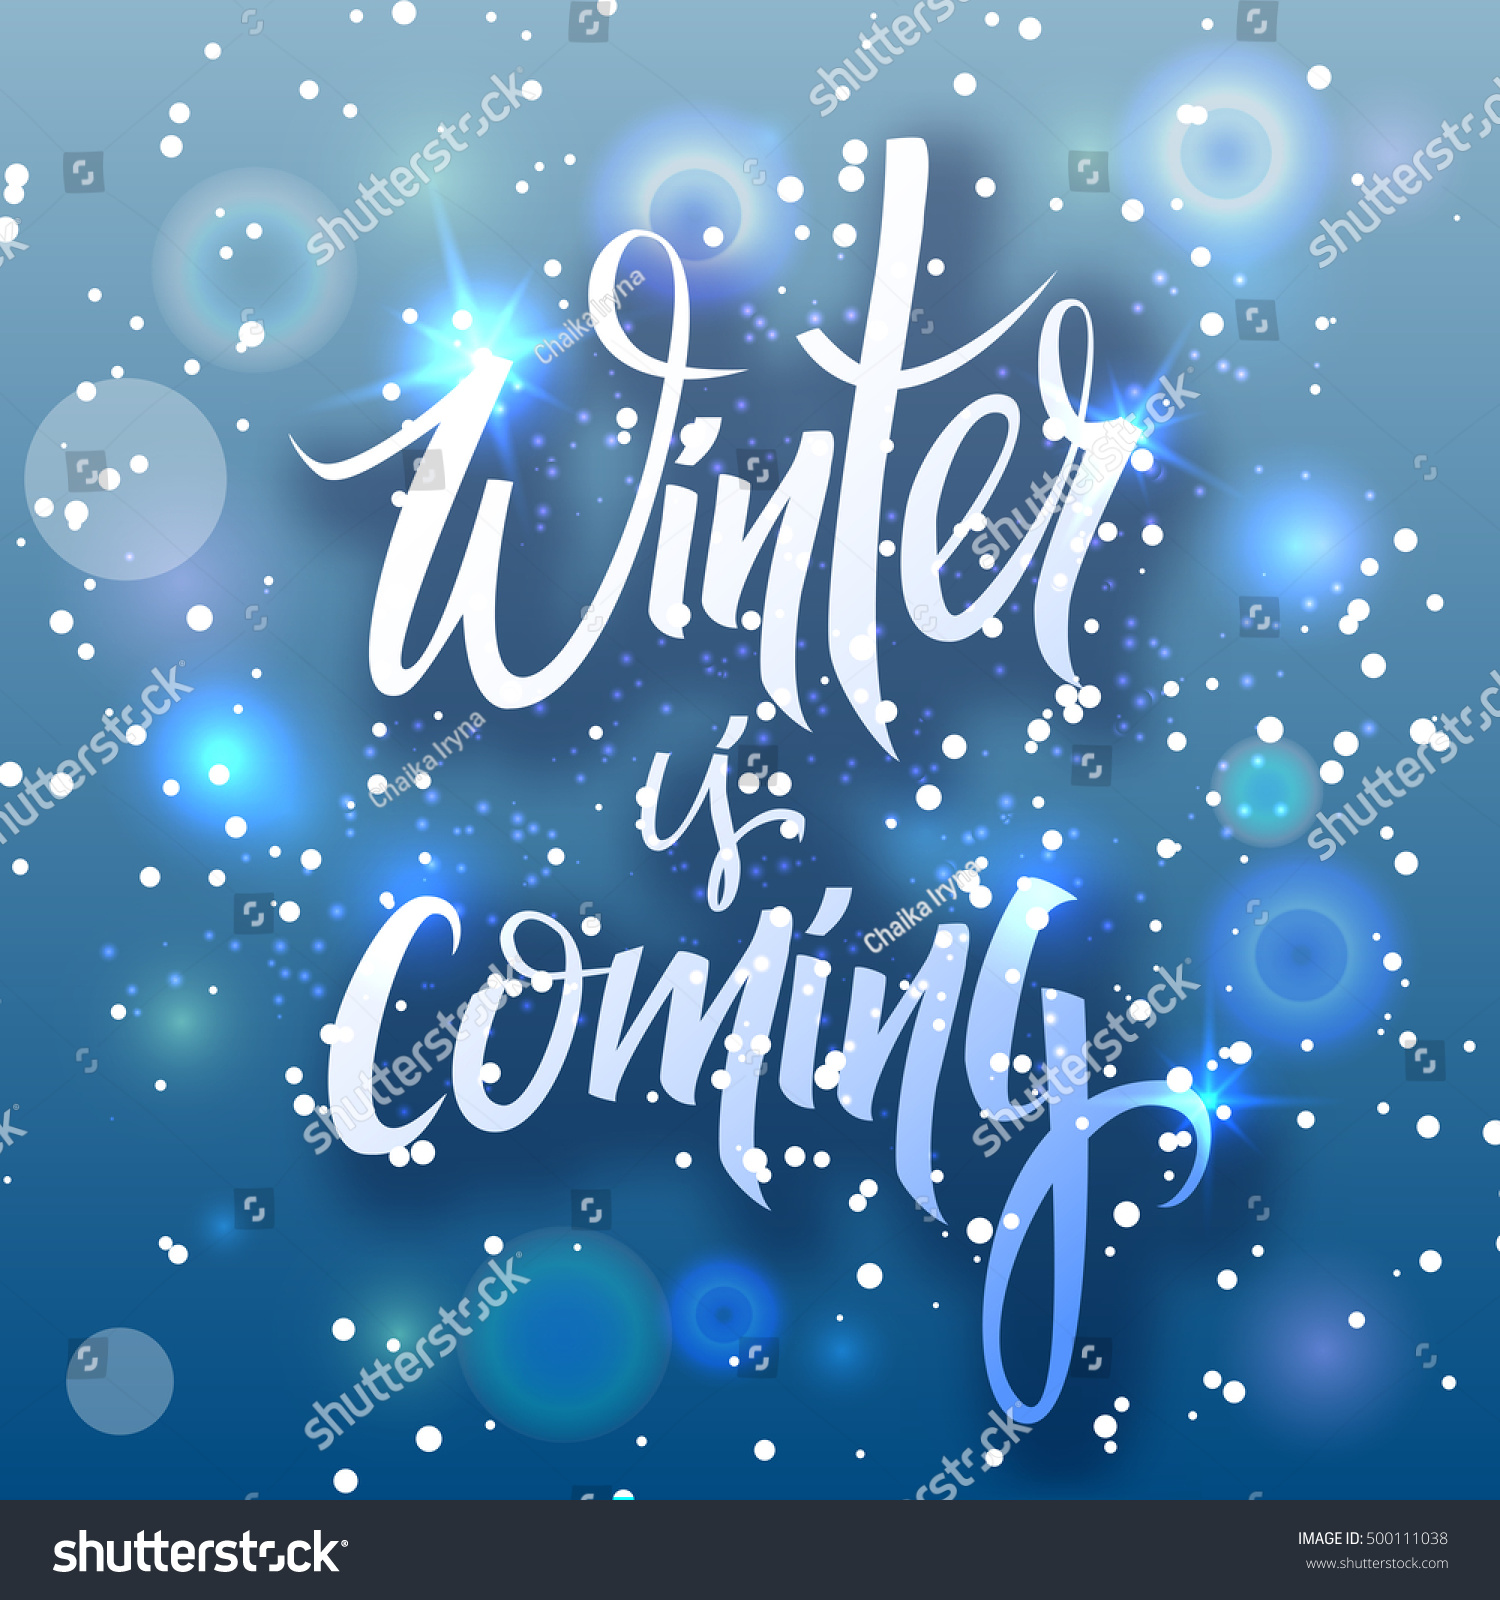 Download Winter Is Coming. Seasonal Vector Hand Drawn Lettering On The Background Of Snowflakes And ...